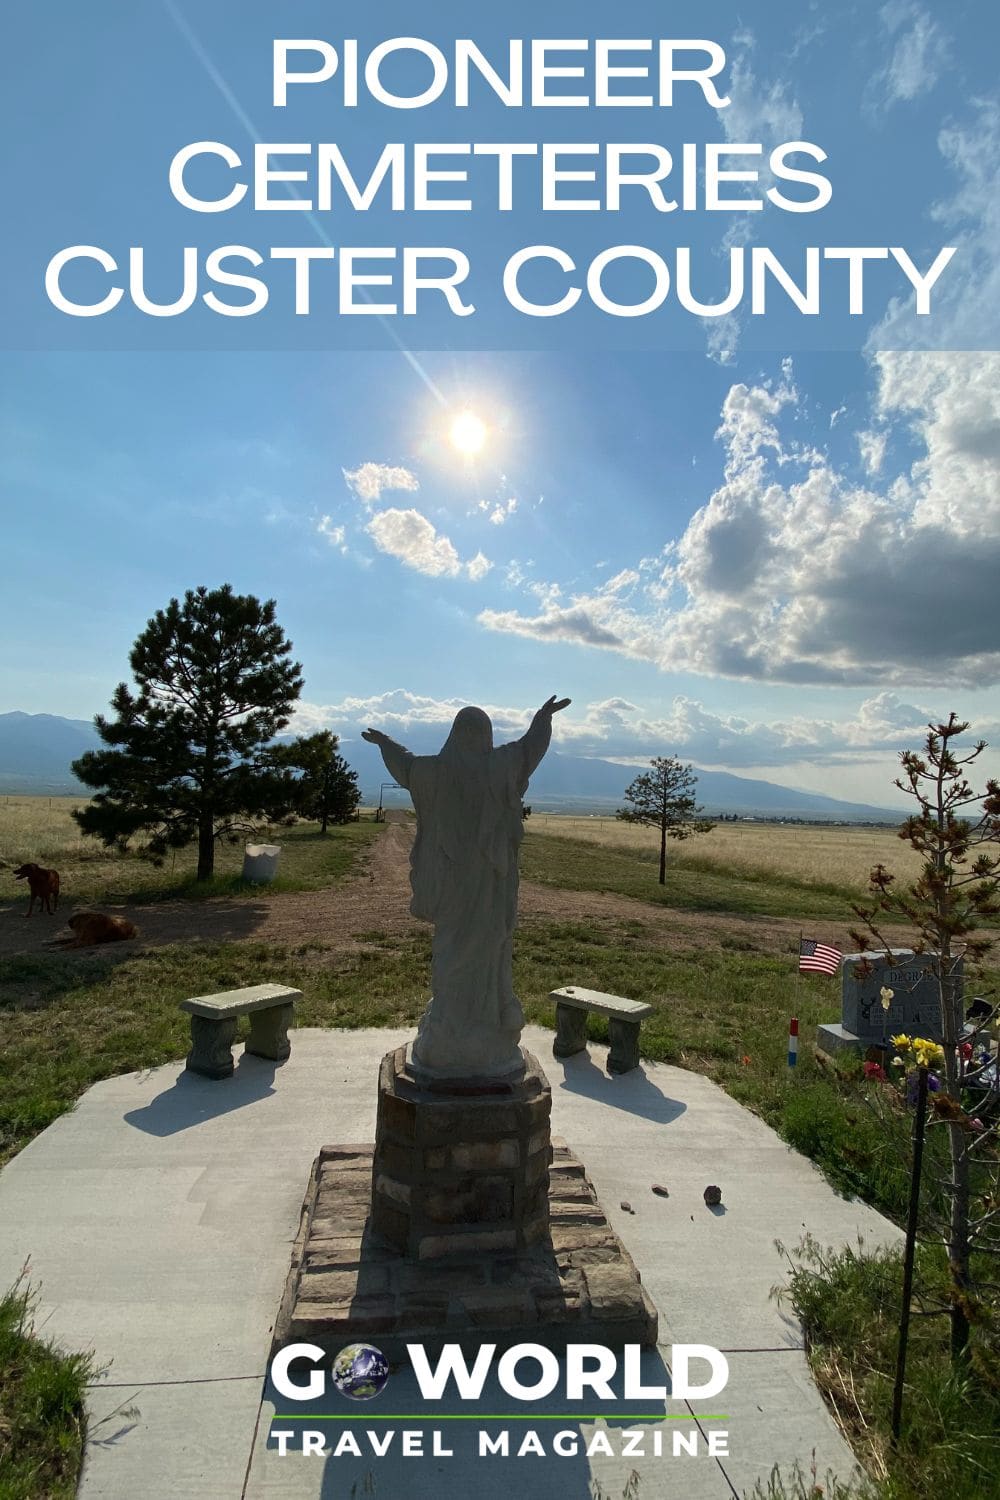 Visit the Pioneer Cemeteries of Custer County, Colorado for fascinating history, interesting stories of past residents and beautiful serenity. #Colorado #Pioneercemeteriescolorado